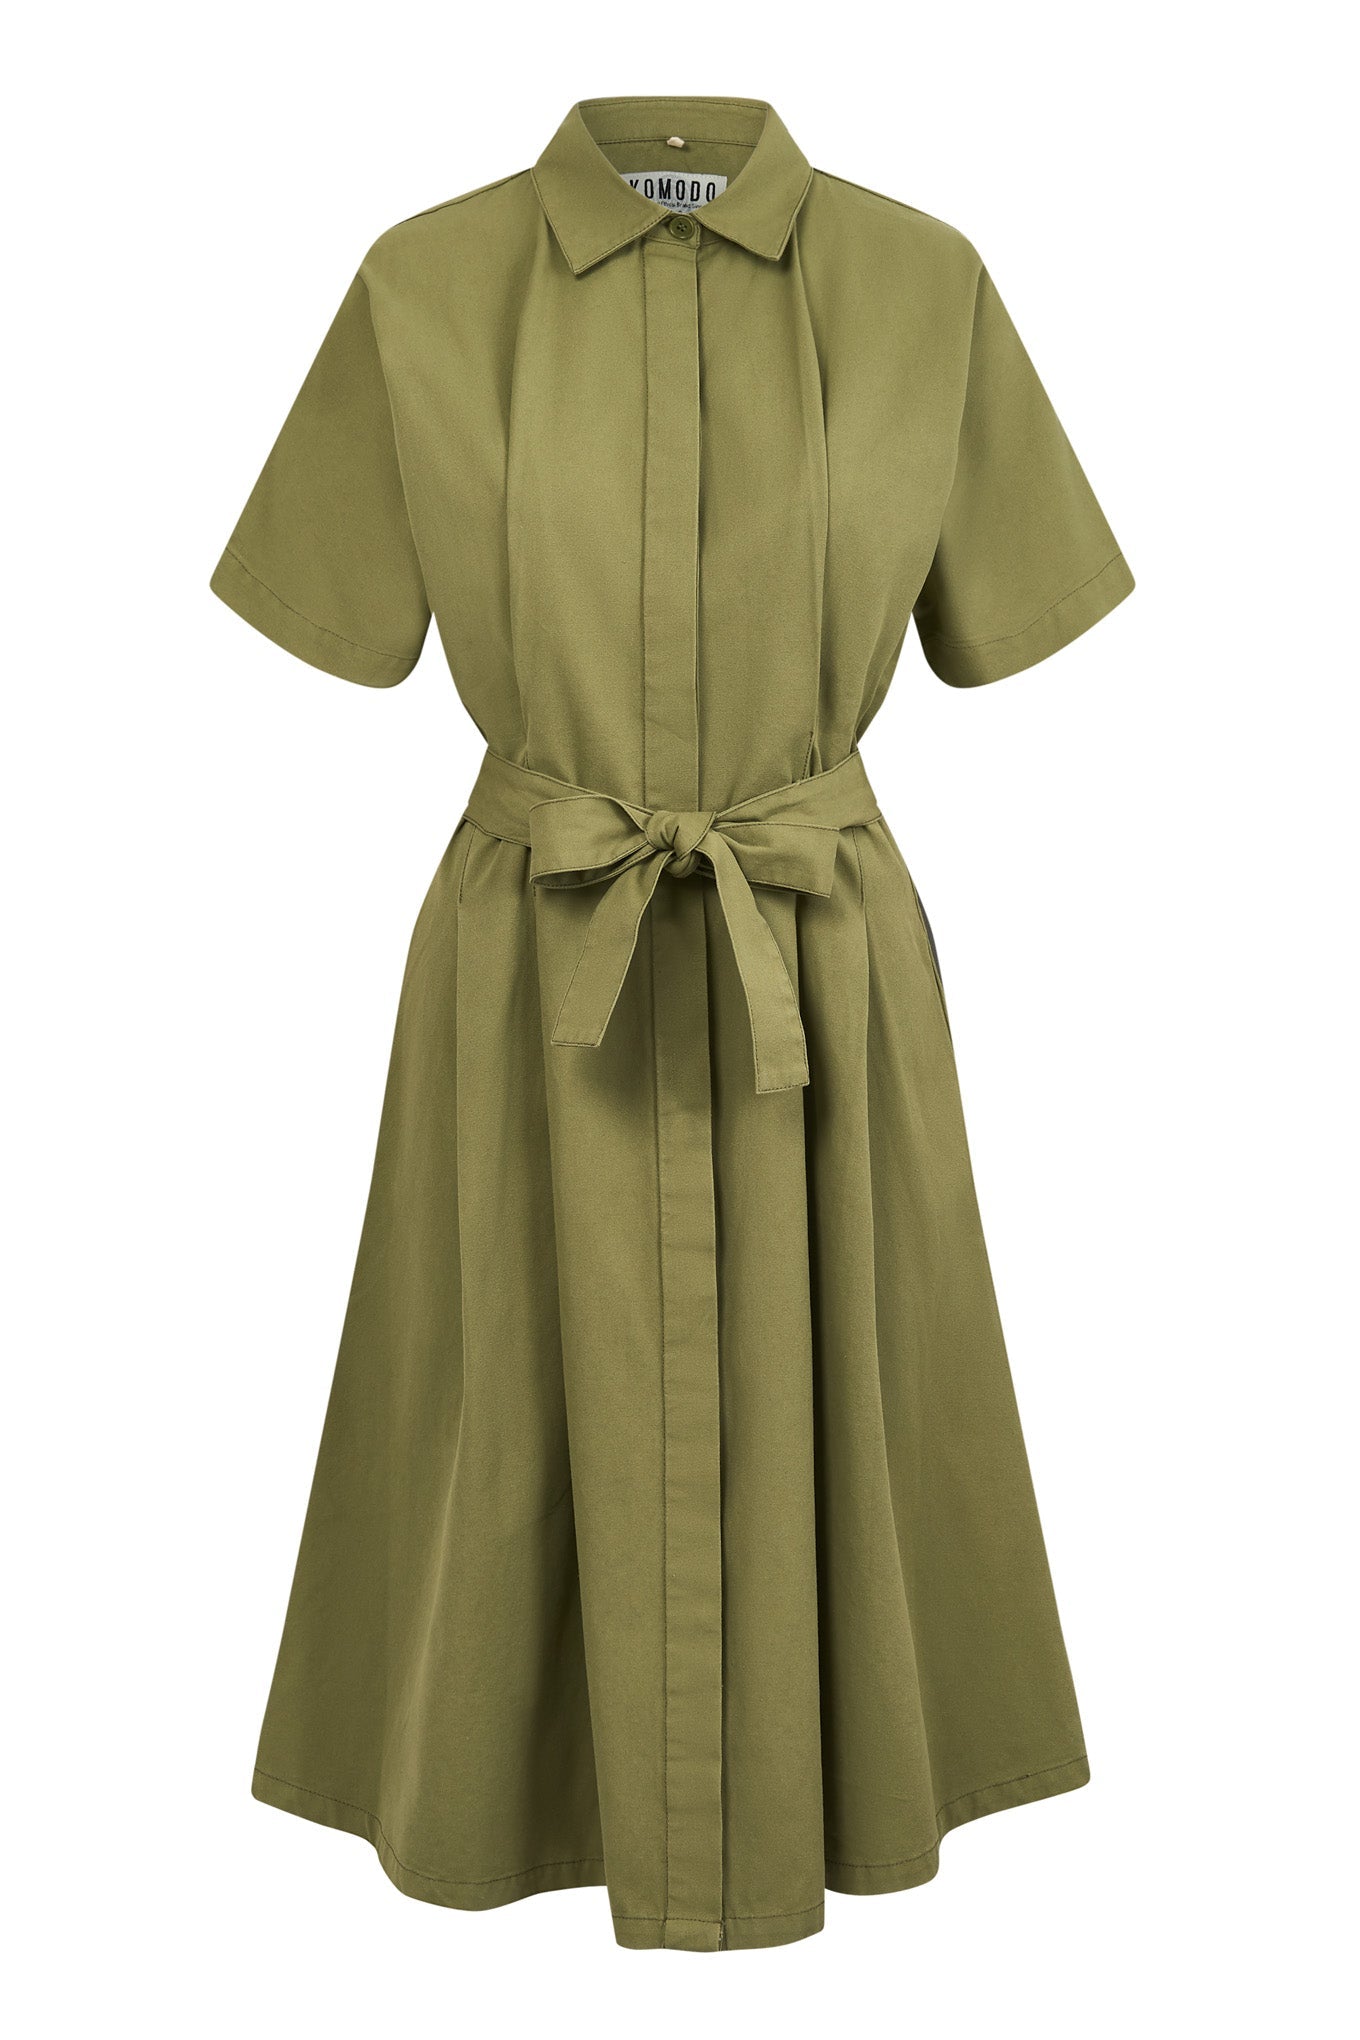 Light green, short-sleeved dress ASHES made from 100% organic cotton by Komodo